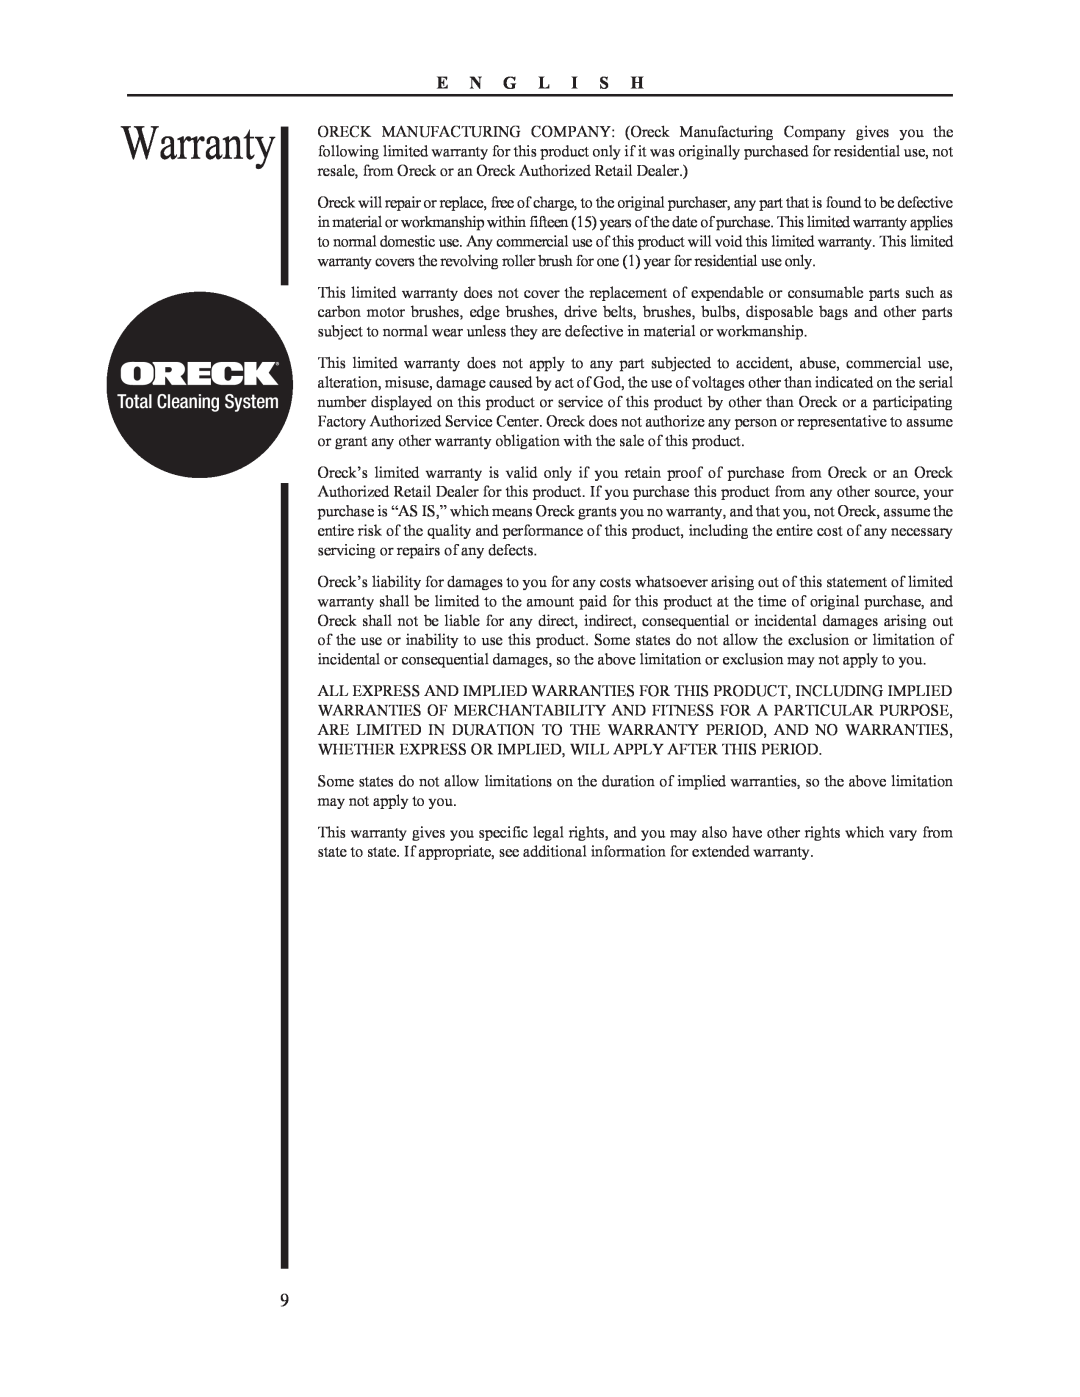 Oreck 79053-01REVA manual Warranty, Total Cleaning System, E N G L I S H 